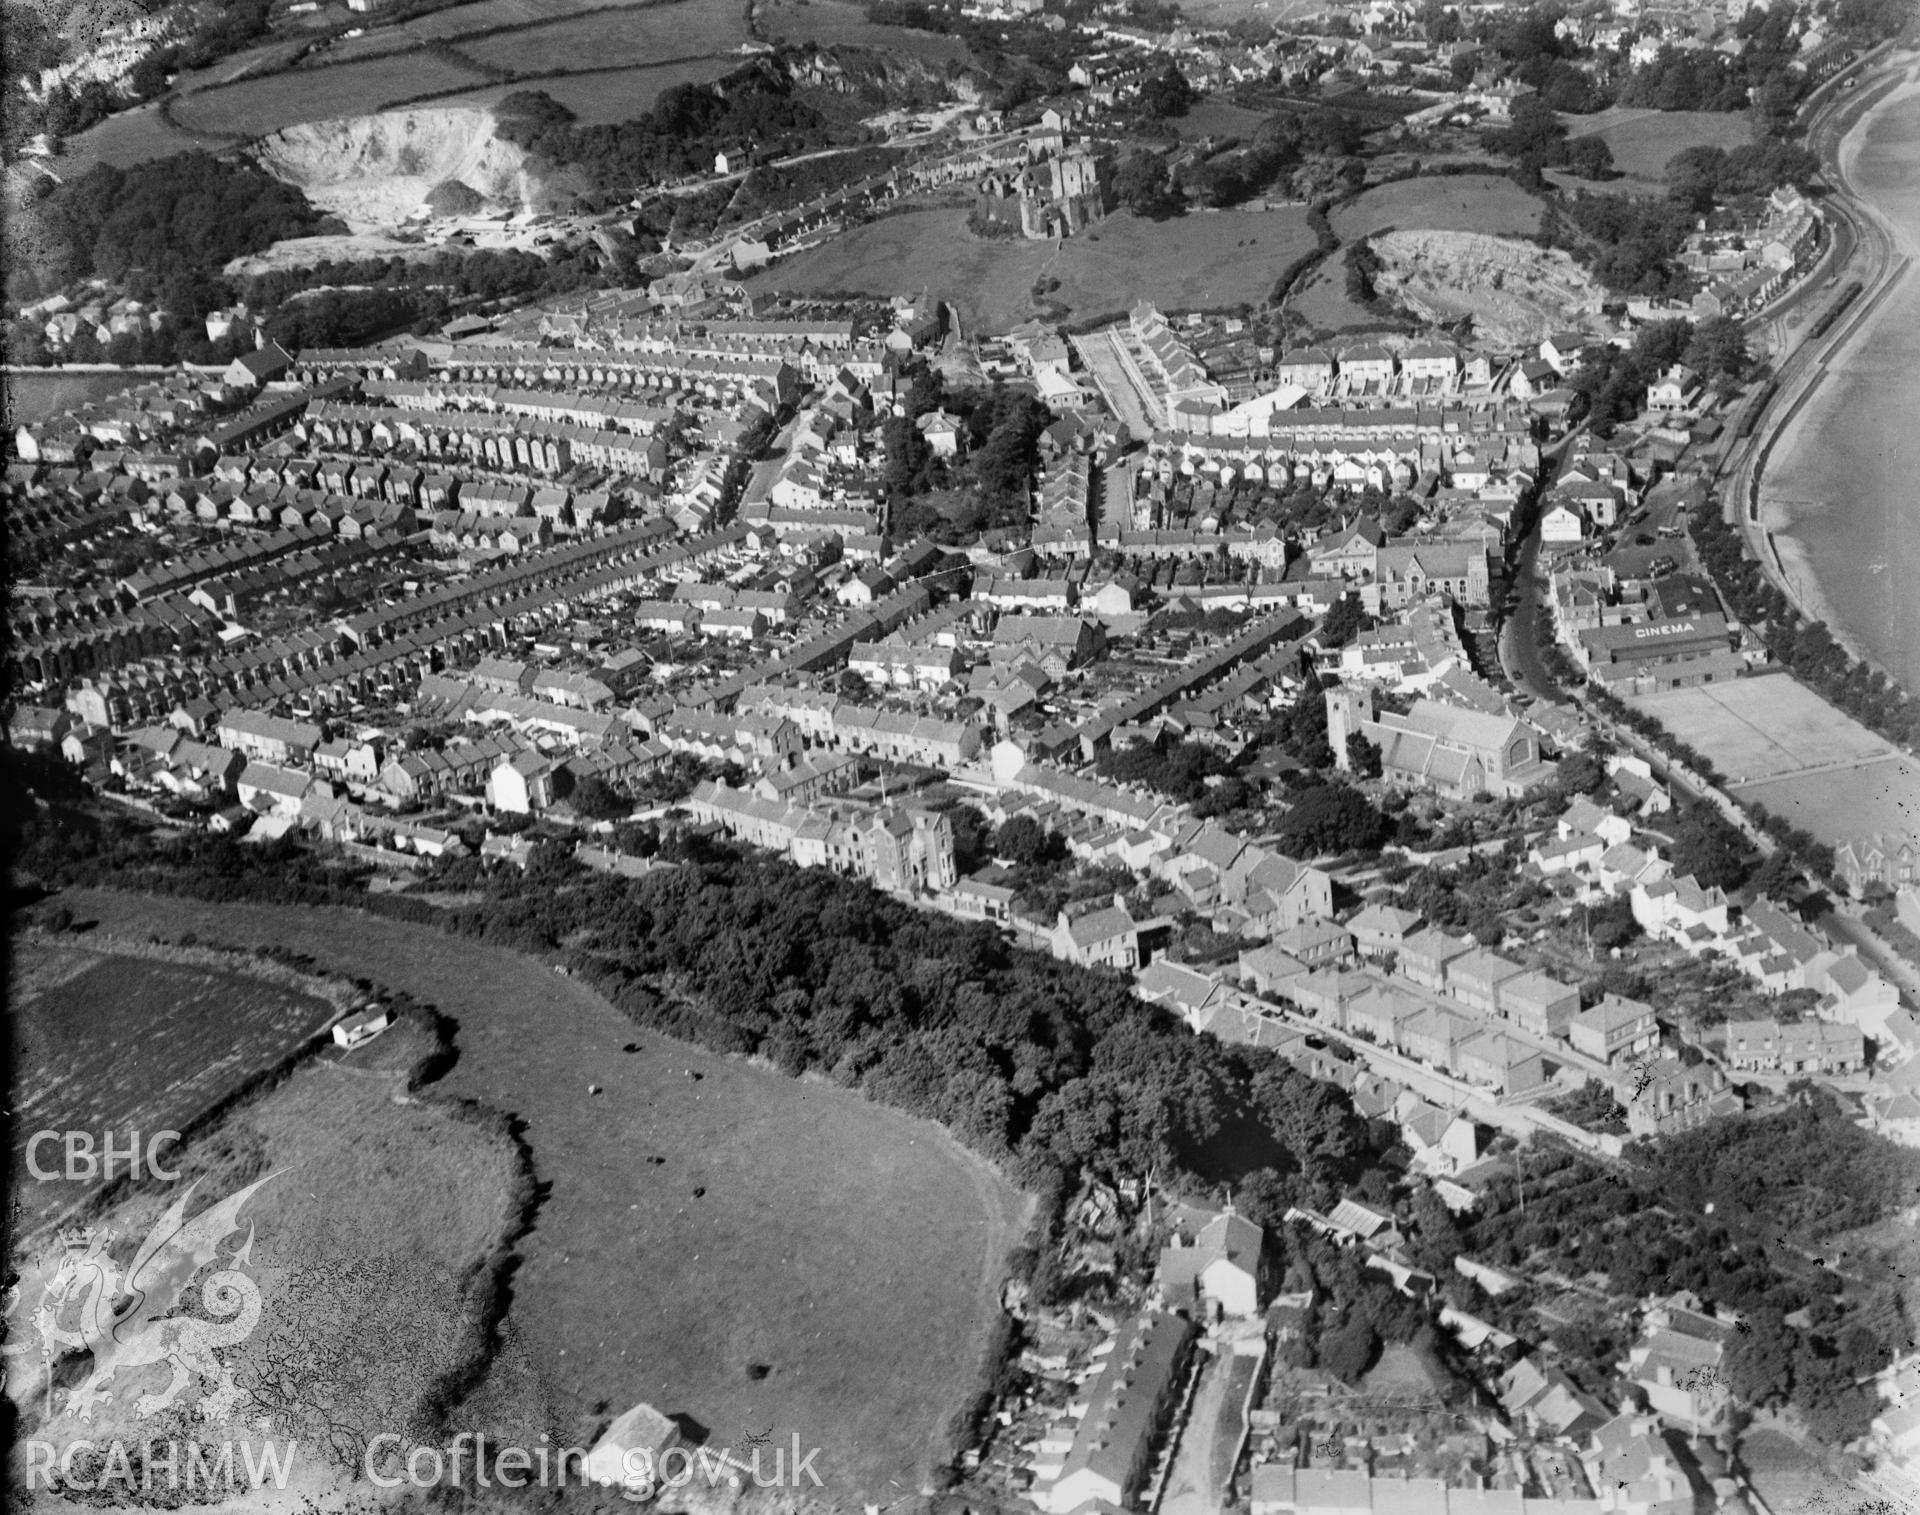 View of Oystermouth, Langland area, oblique aerial view. 5?x4? black and white glass plate negative.